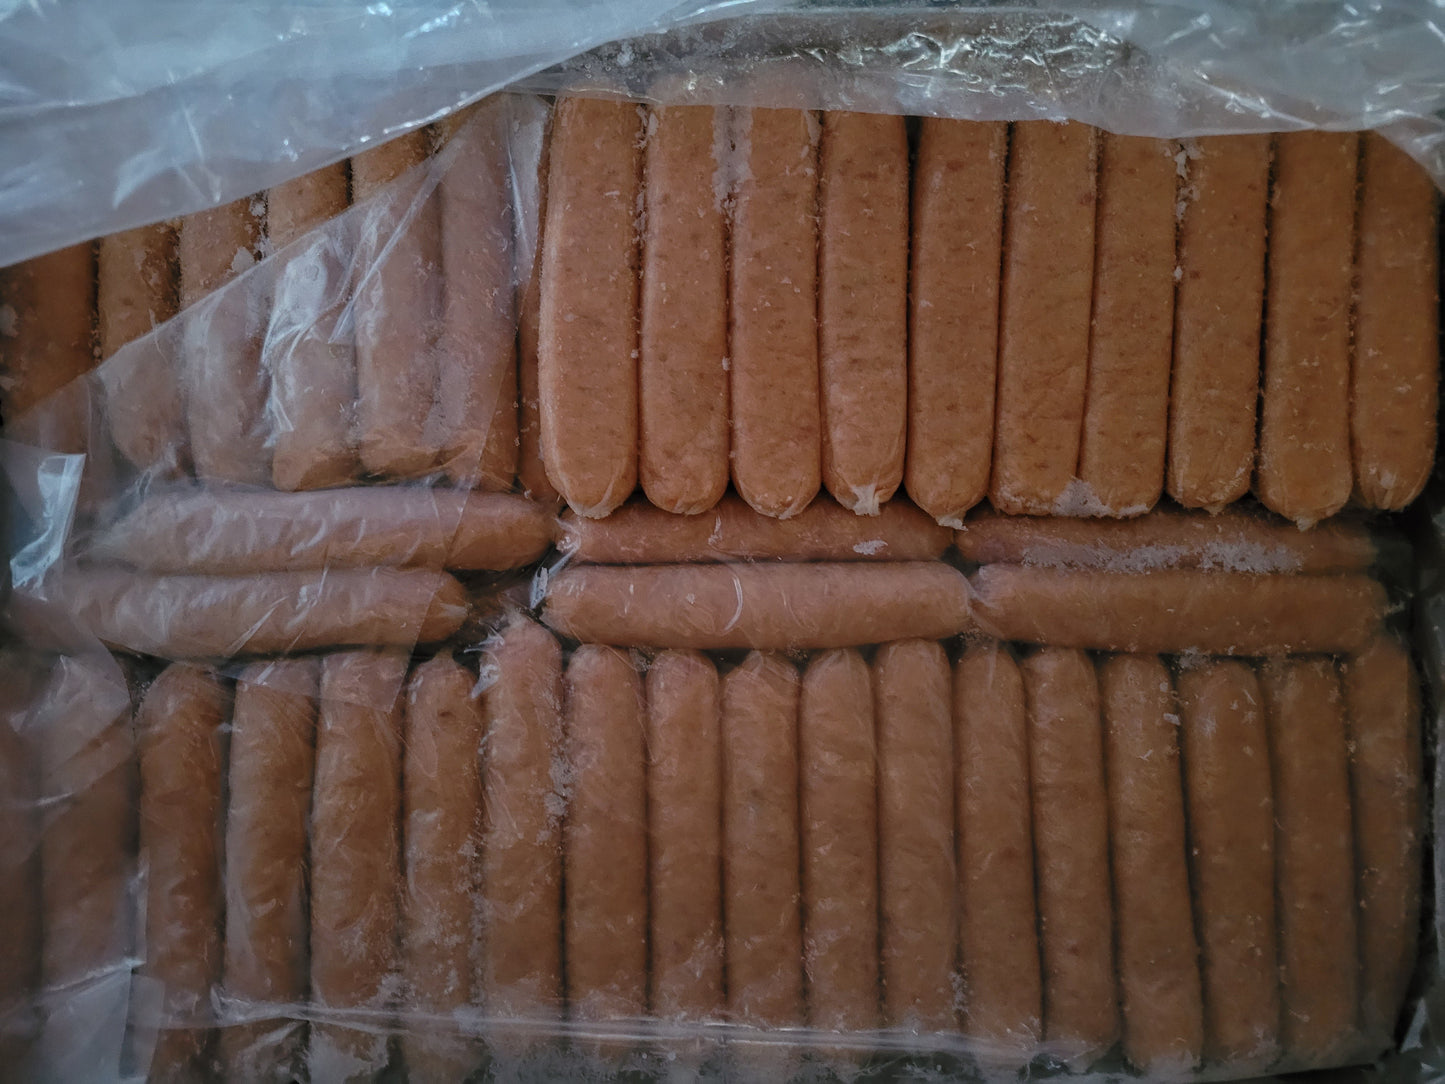 Big Red Breakfast Sausage - 11 lbs (about 130 pieces)